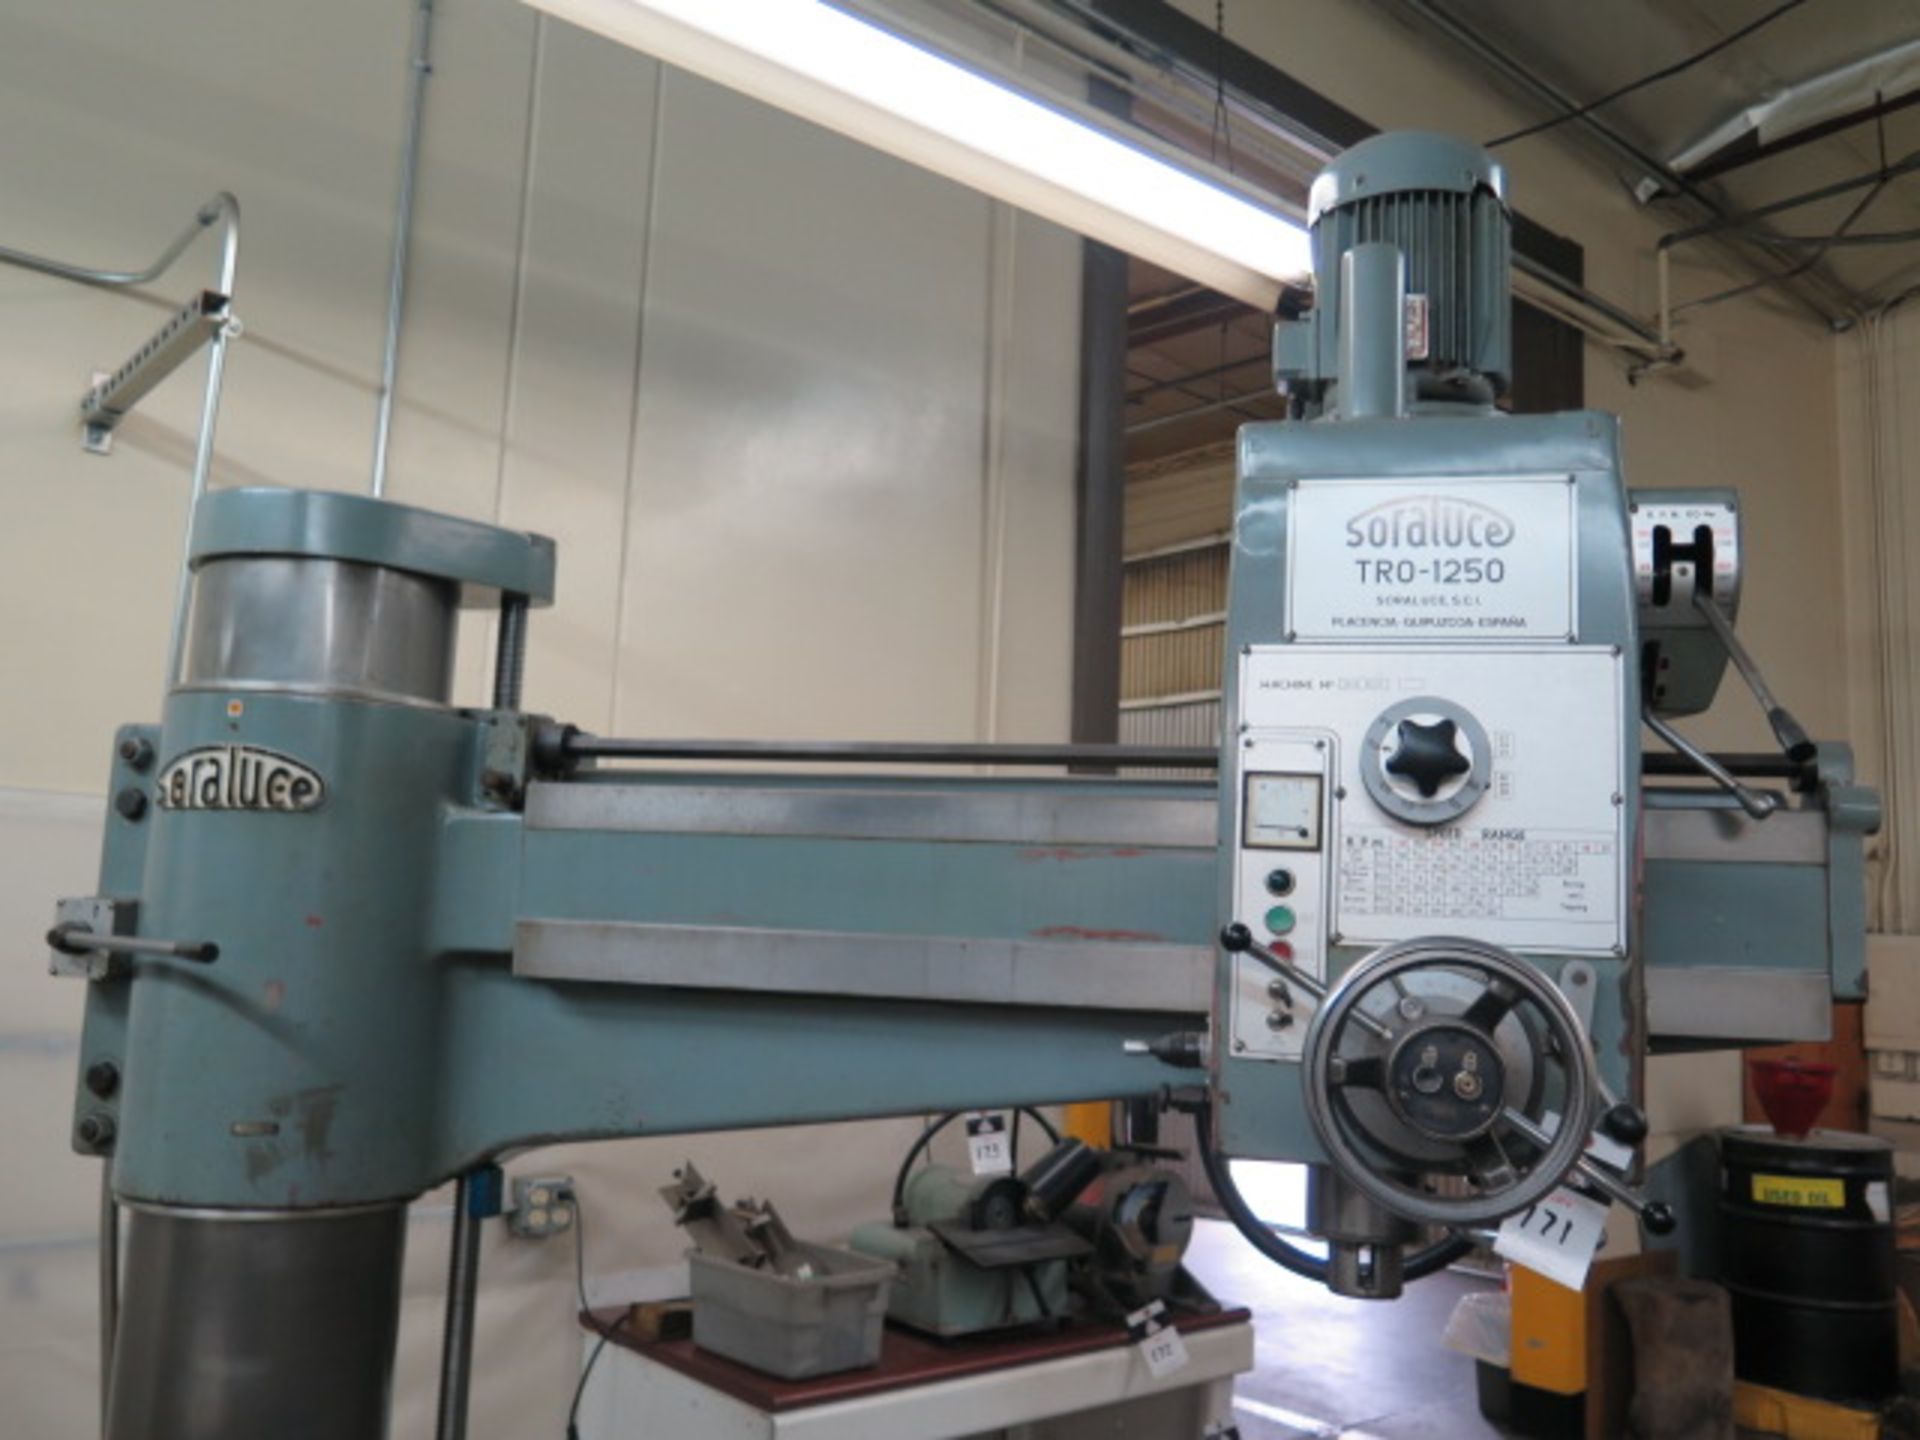 Soraluce TR0-1250 11” Column x 36” Radial Arm Drill s/n 3208-10208 w/ 29-1700 RPM, SOLD AS IS - Image 4 of 10